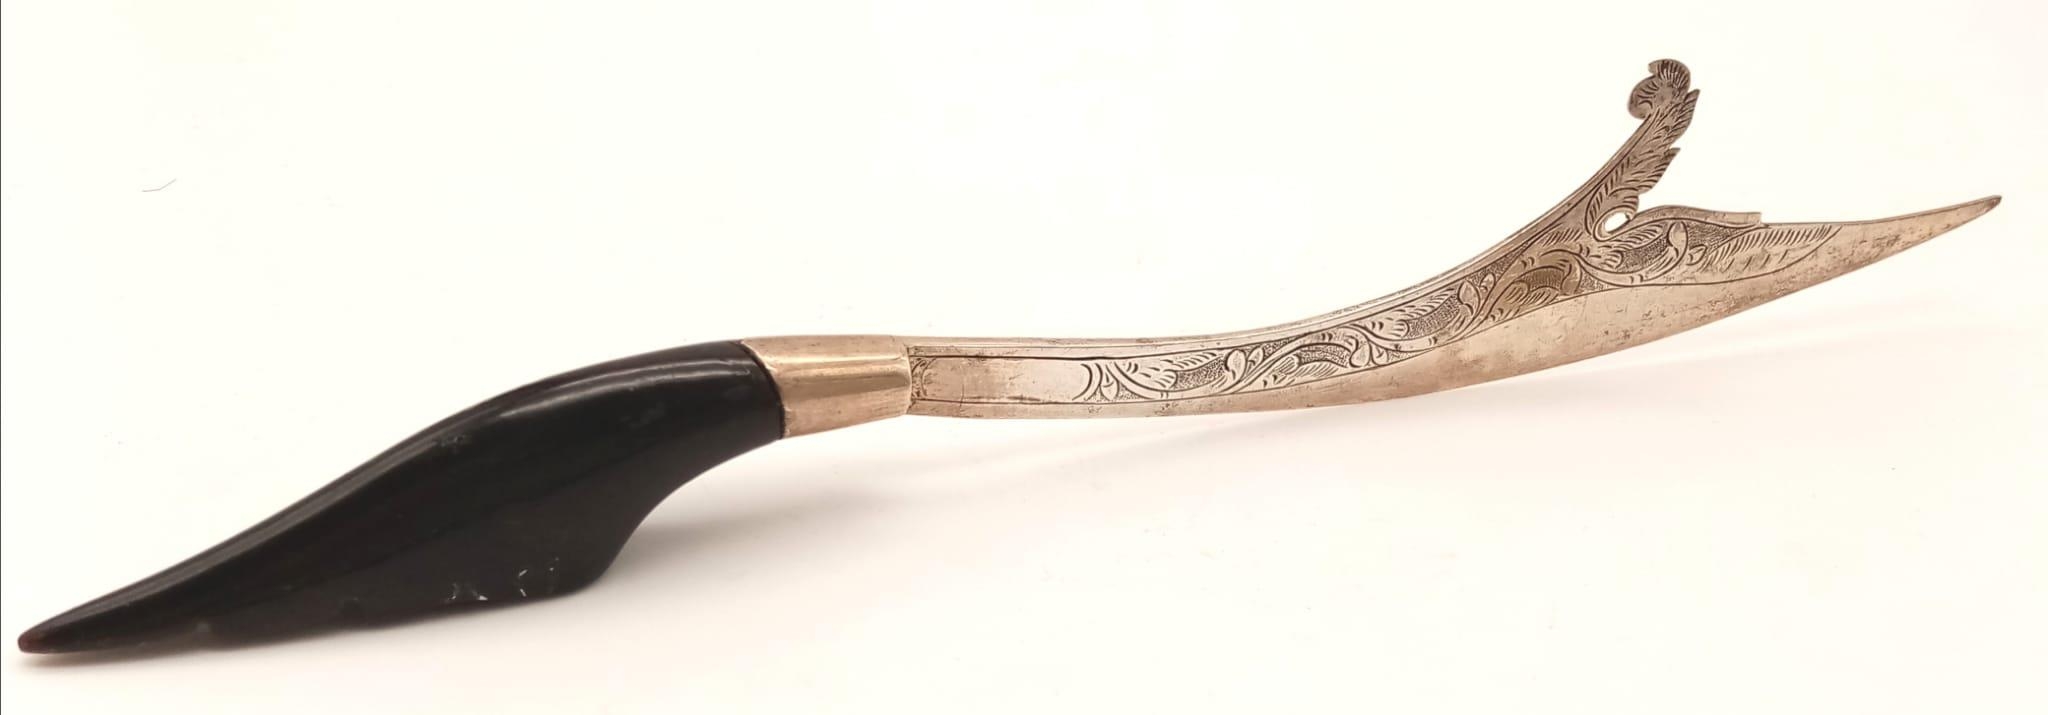 An Antique Solid Silver Islamic Letter-Opener. Possible horn handle. Islamic hallmarks. 25cm. 43g